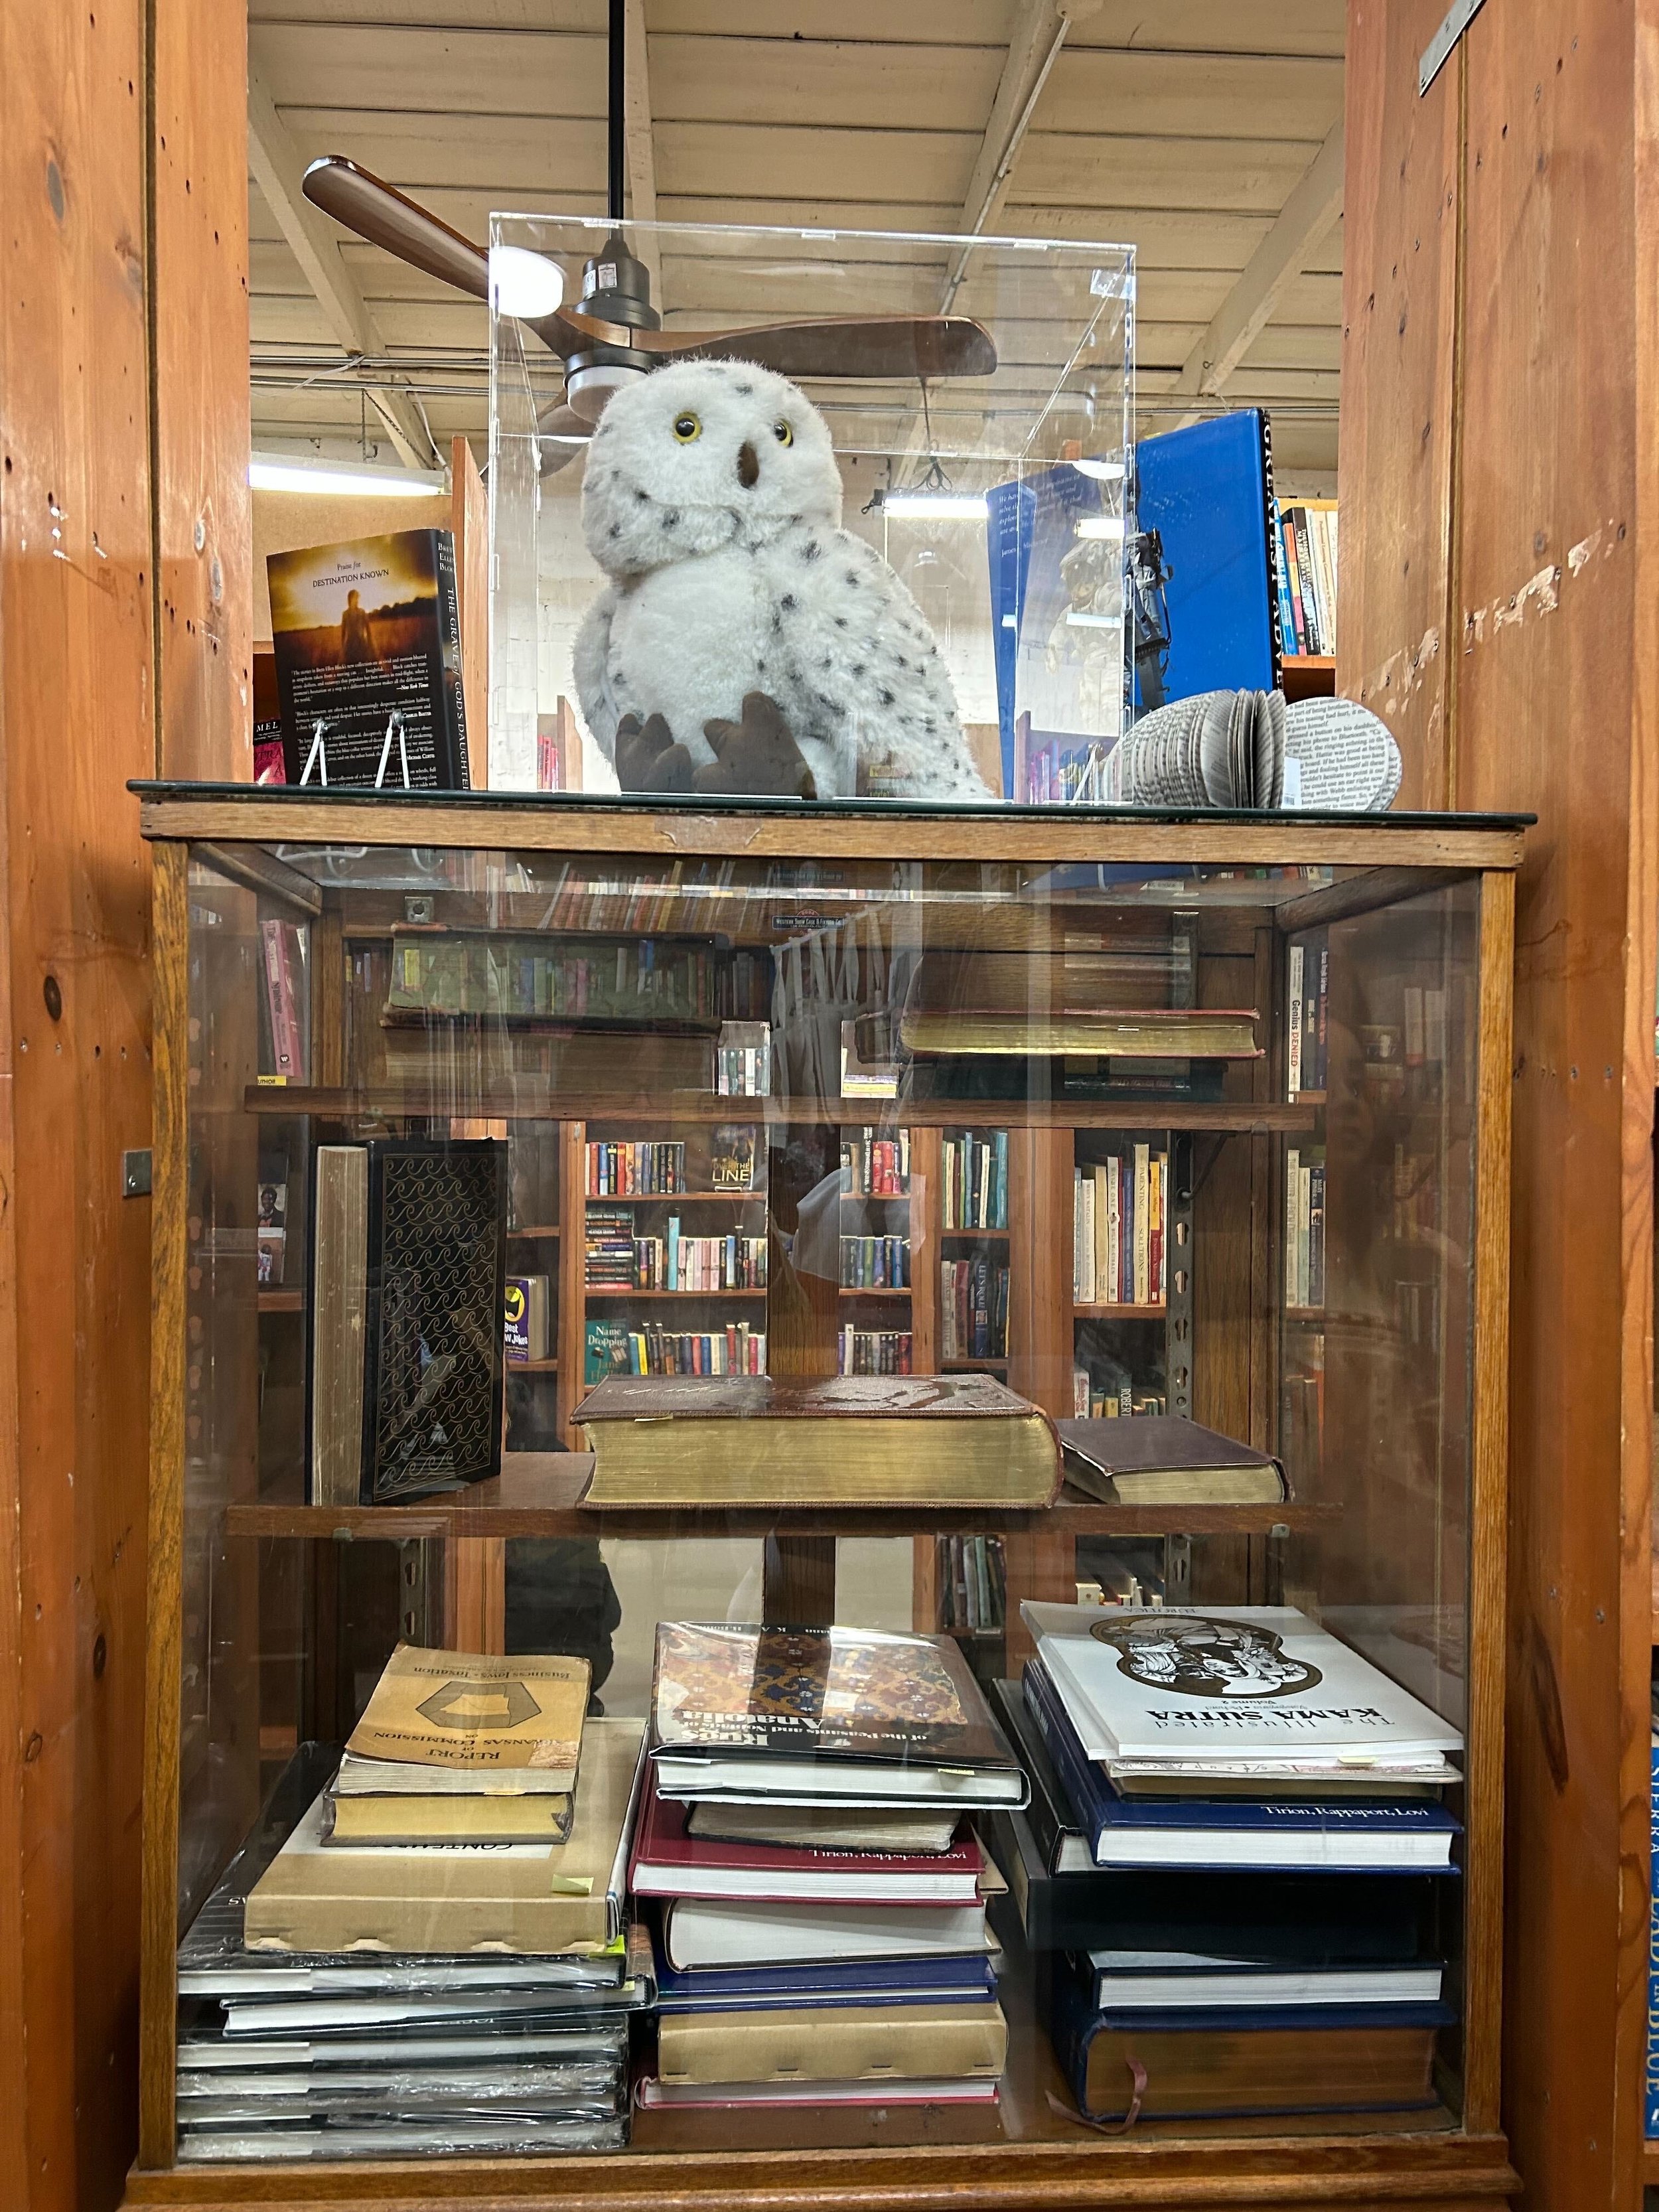 The "mascot" of the bookstore, the Owl on top of a glass case